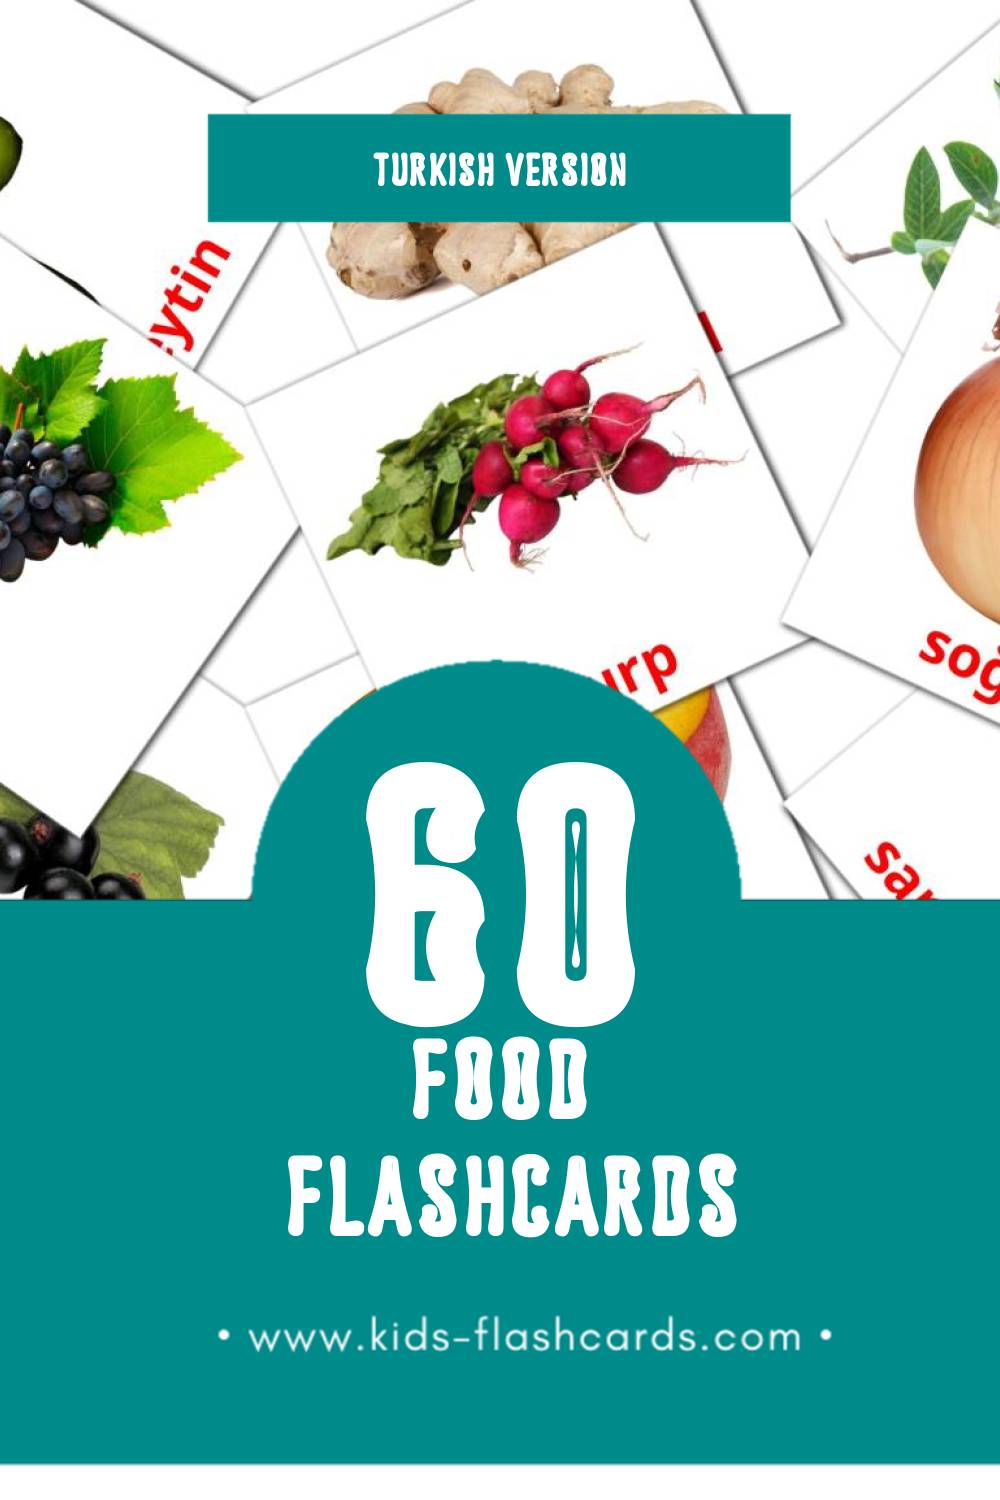 Visual gıda Flashcards for Toddlers (60 cards in Turkish)